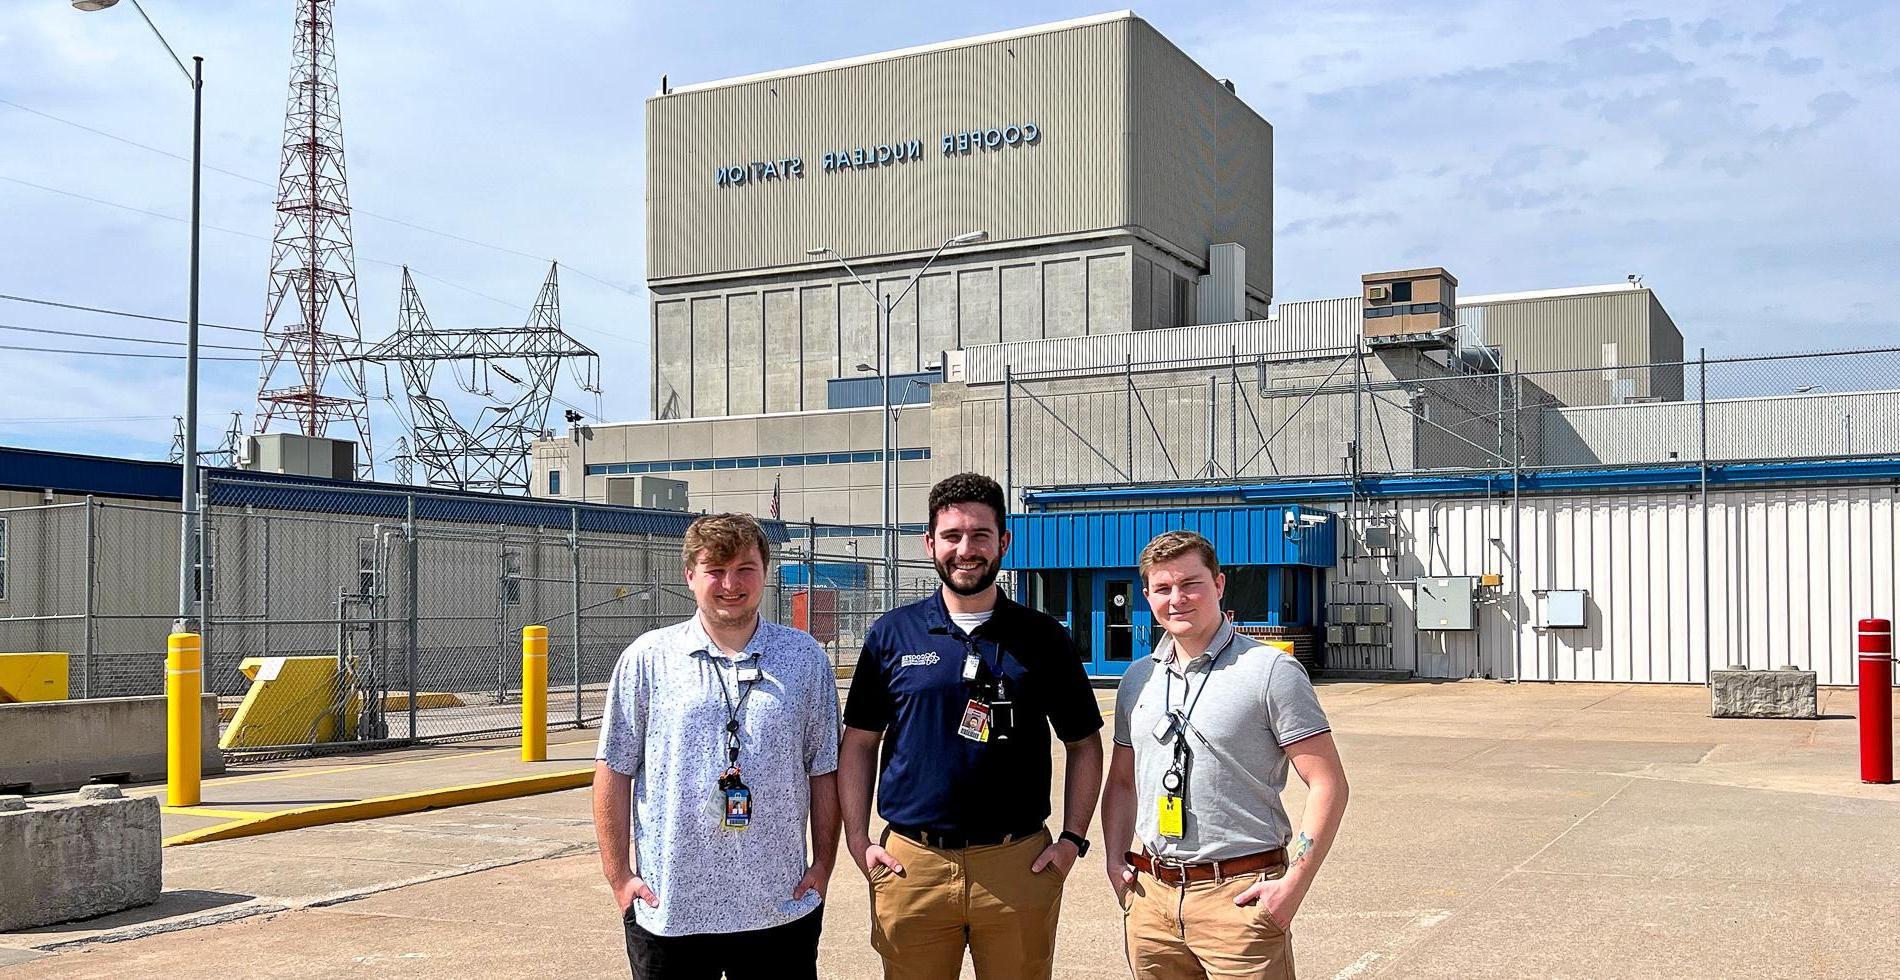 Three men in polos with badges stand on a concrete parking lot in front of a blocky concrete building bearing the words "Cooper Nuclear Station."